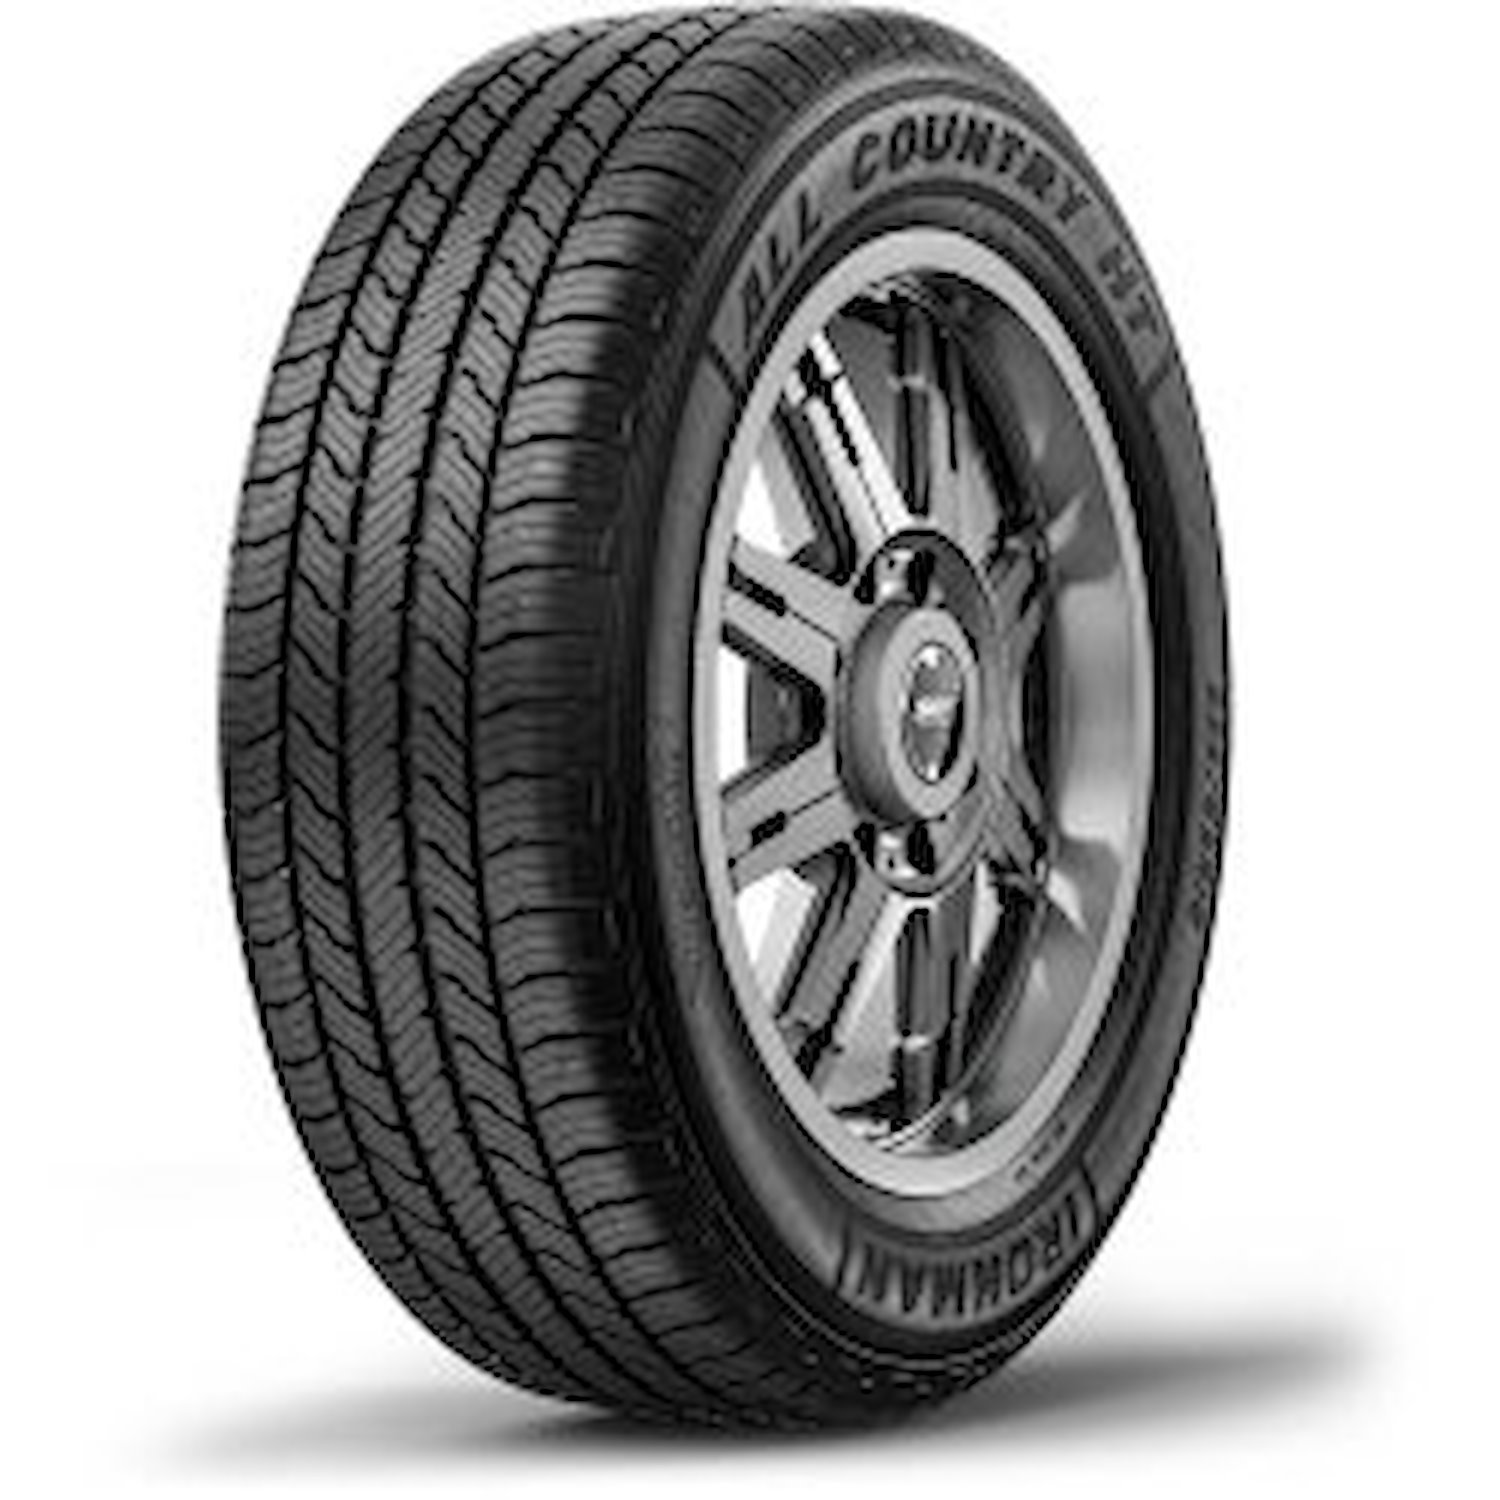 03138 All Country HT Tire, 255/55R18XL, 109V